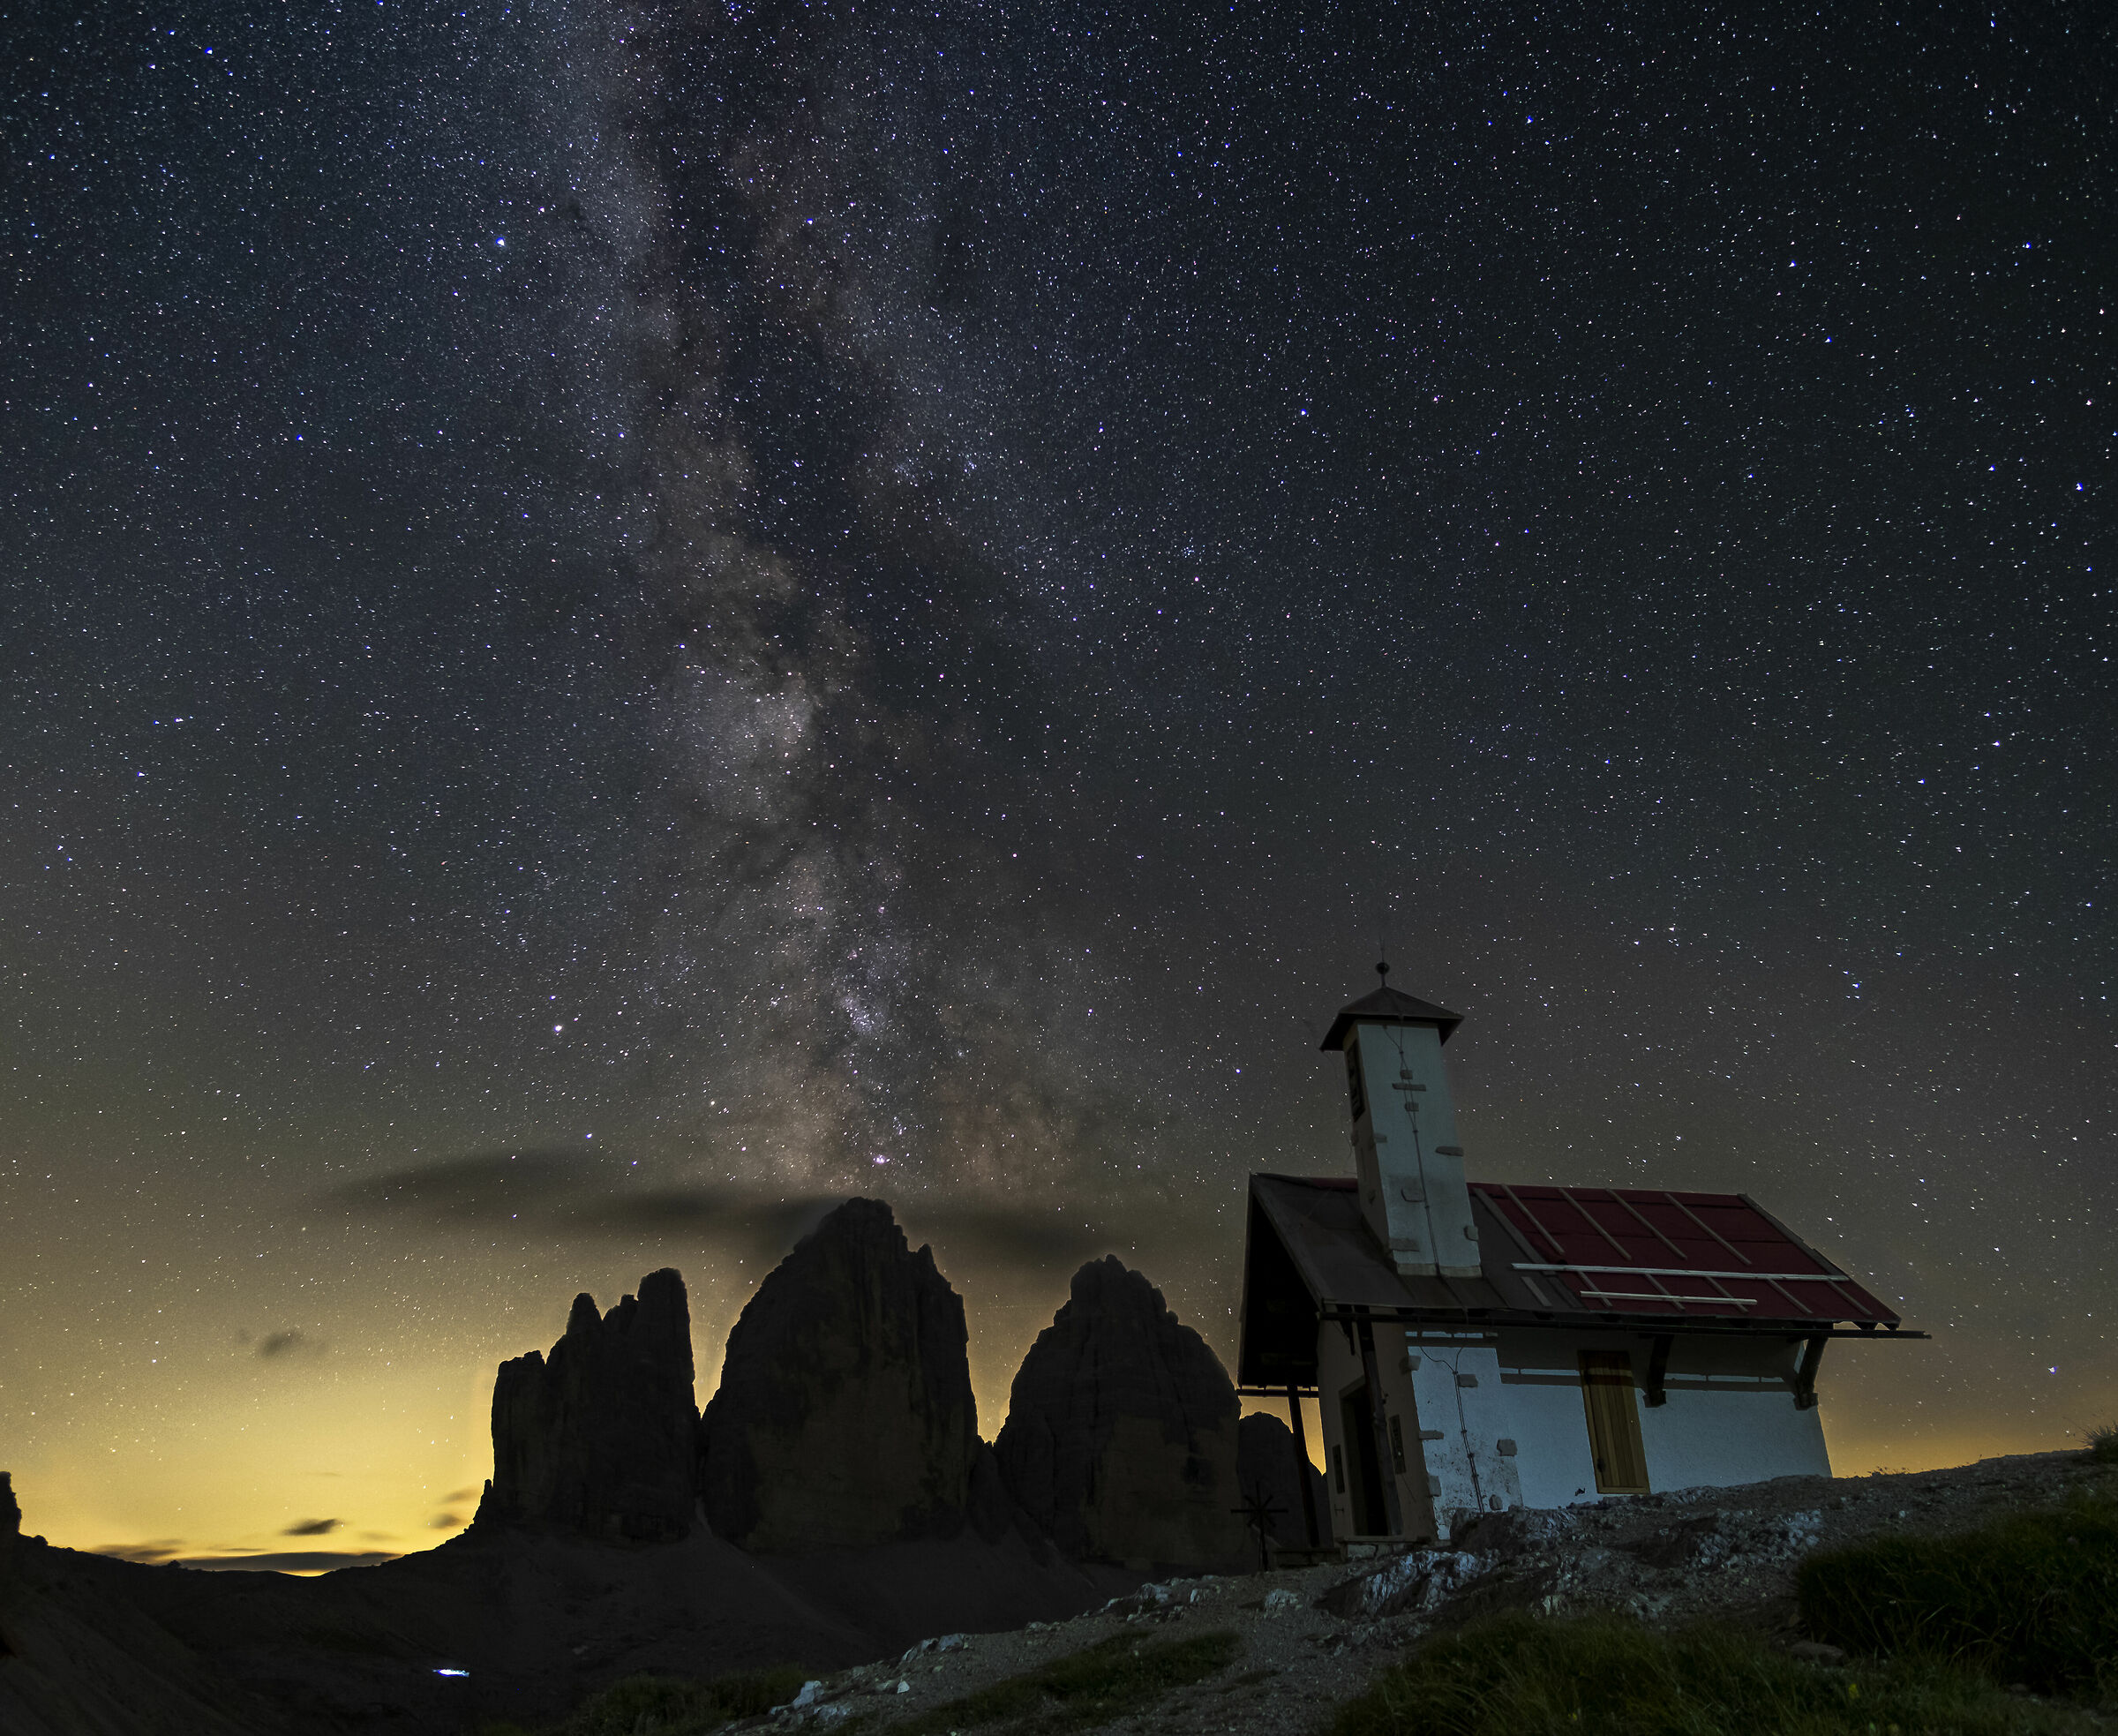 The church under the stars...